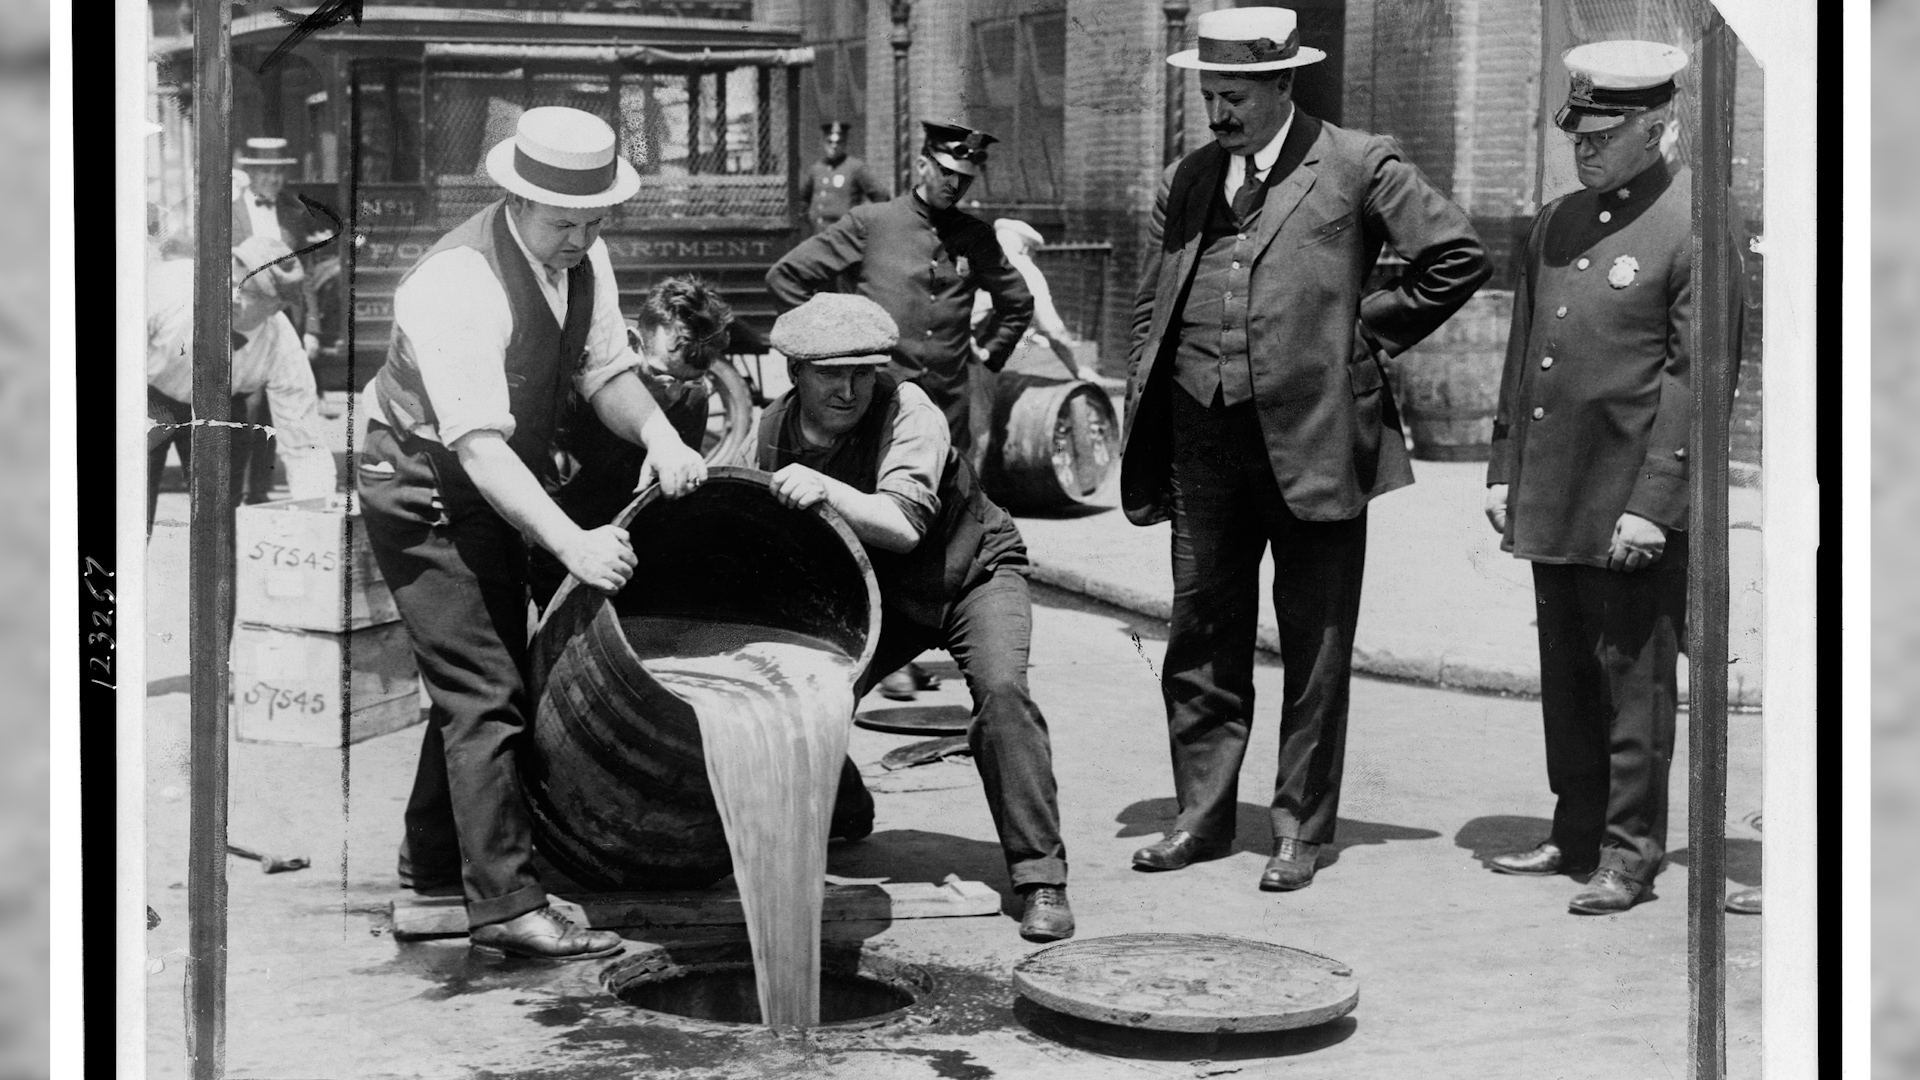 New York City Deputy Police Commissioner John Leach watching agents pour liquor into sewer following a raid during the height of prohibition 1920-1933 (image: Wikipedia)